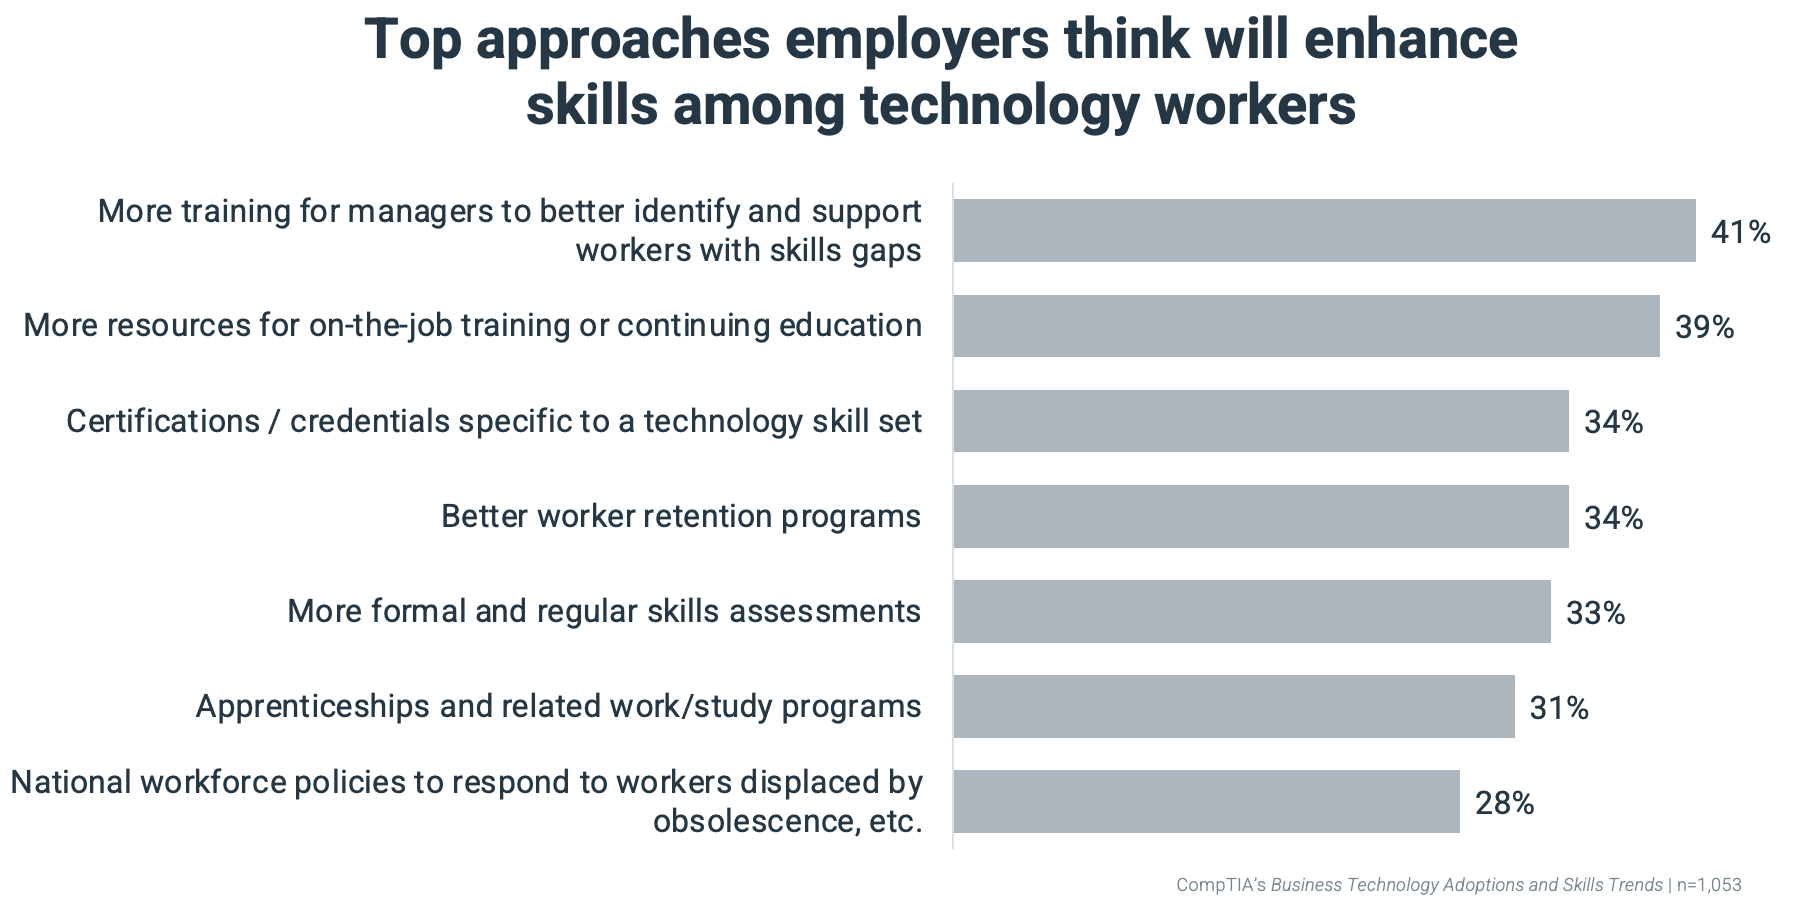 Top approaches employers think will enhance skills among technology workers